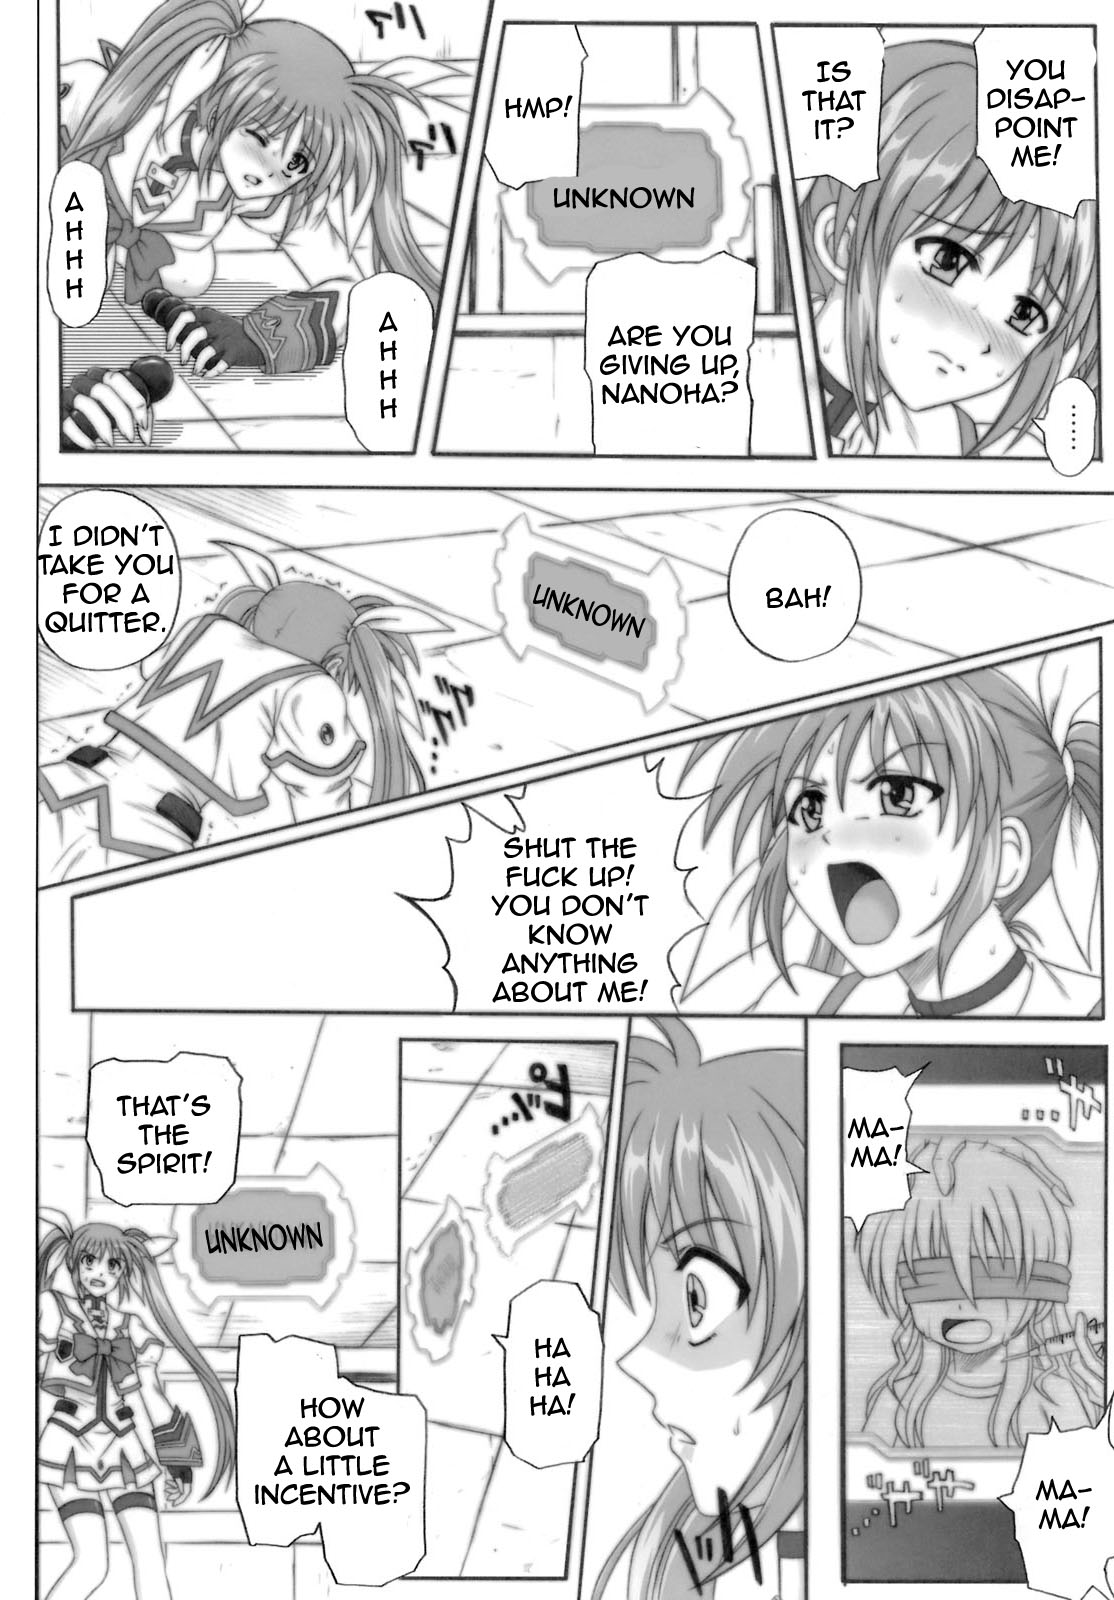 840 Color Classic Situation Note Extention (Mahou Shoujo Lyrical Nanoha) [English] [Rewrite] page 6 full